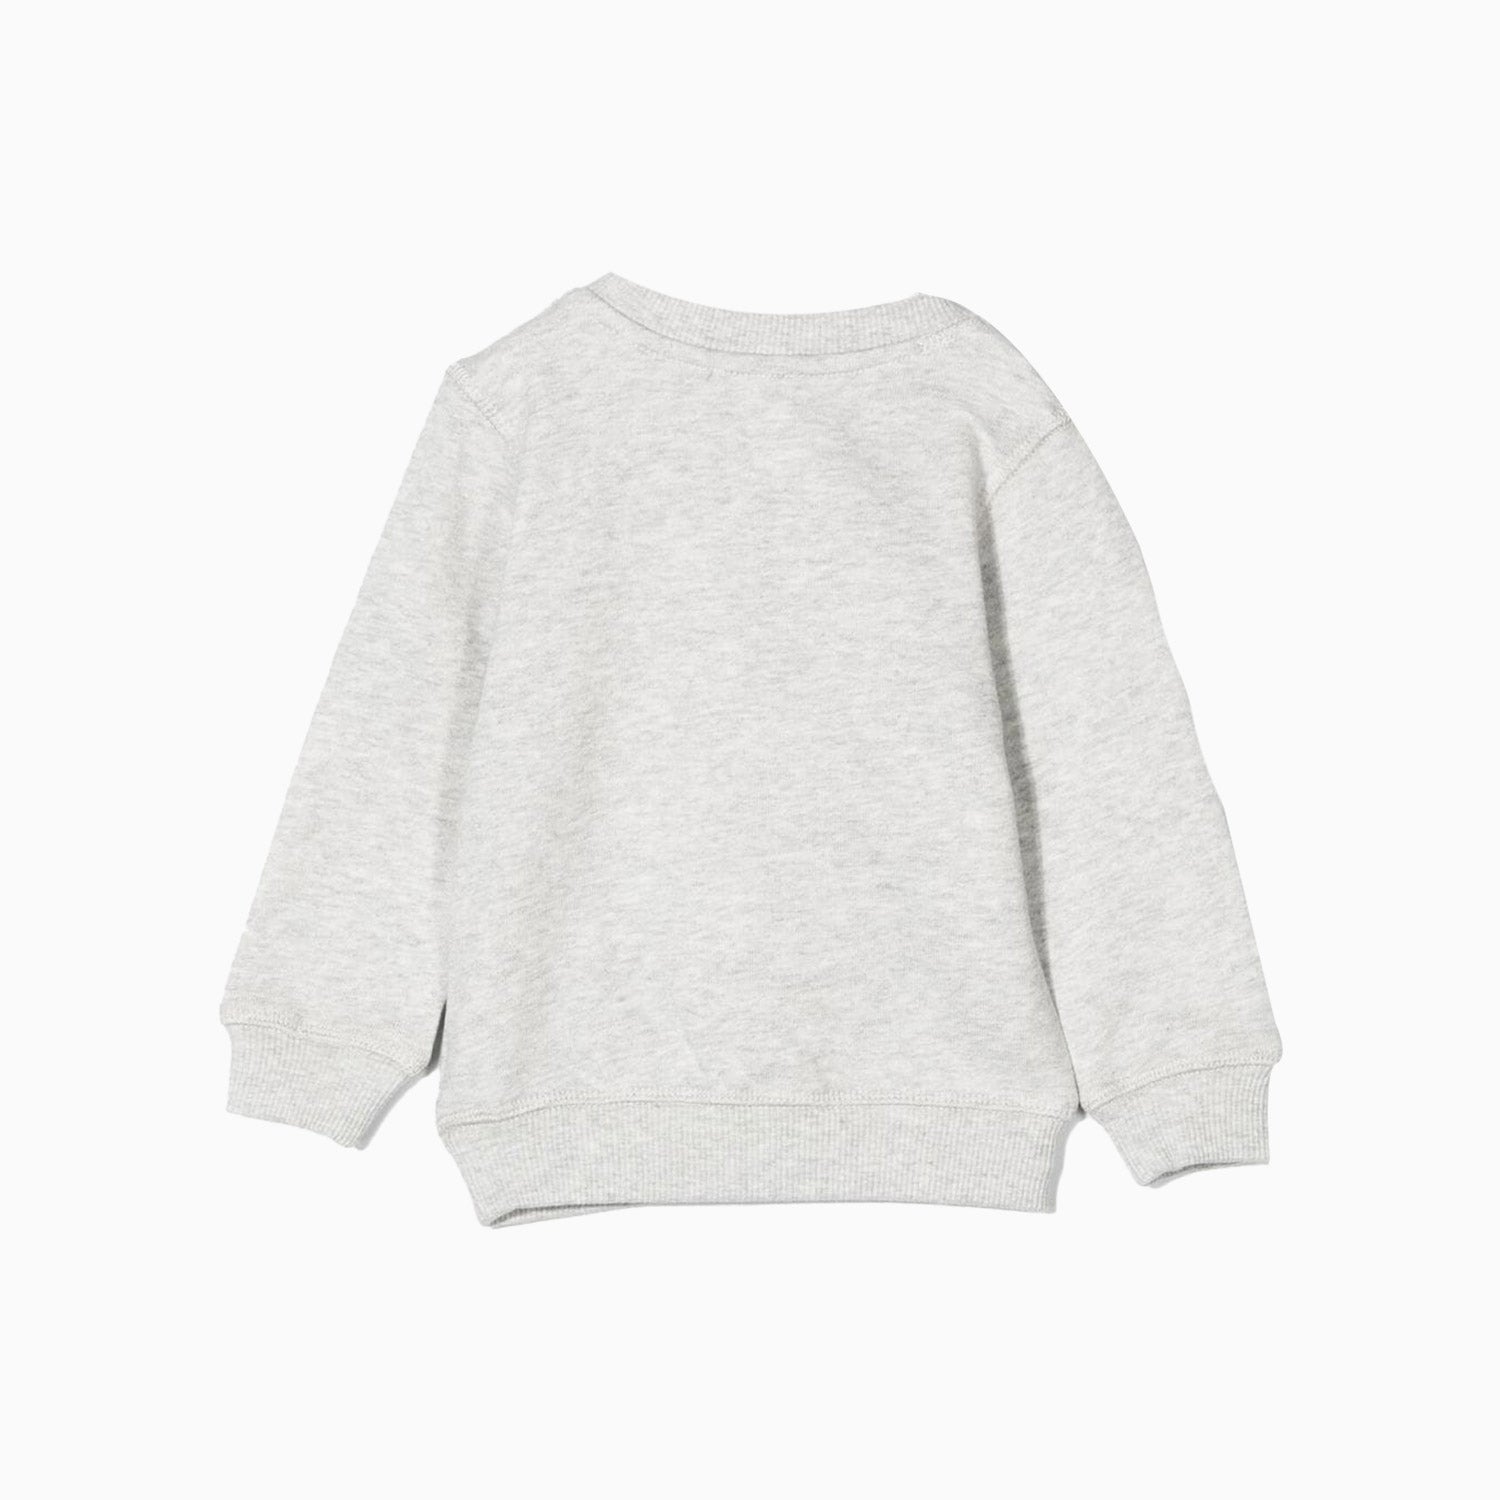 Kenzo Kid's Sweat In Marl Non Brushed Fleece Toddlers - Color: Light Grey Marl - Kids Premium Clothing -